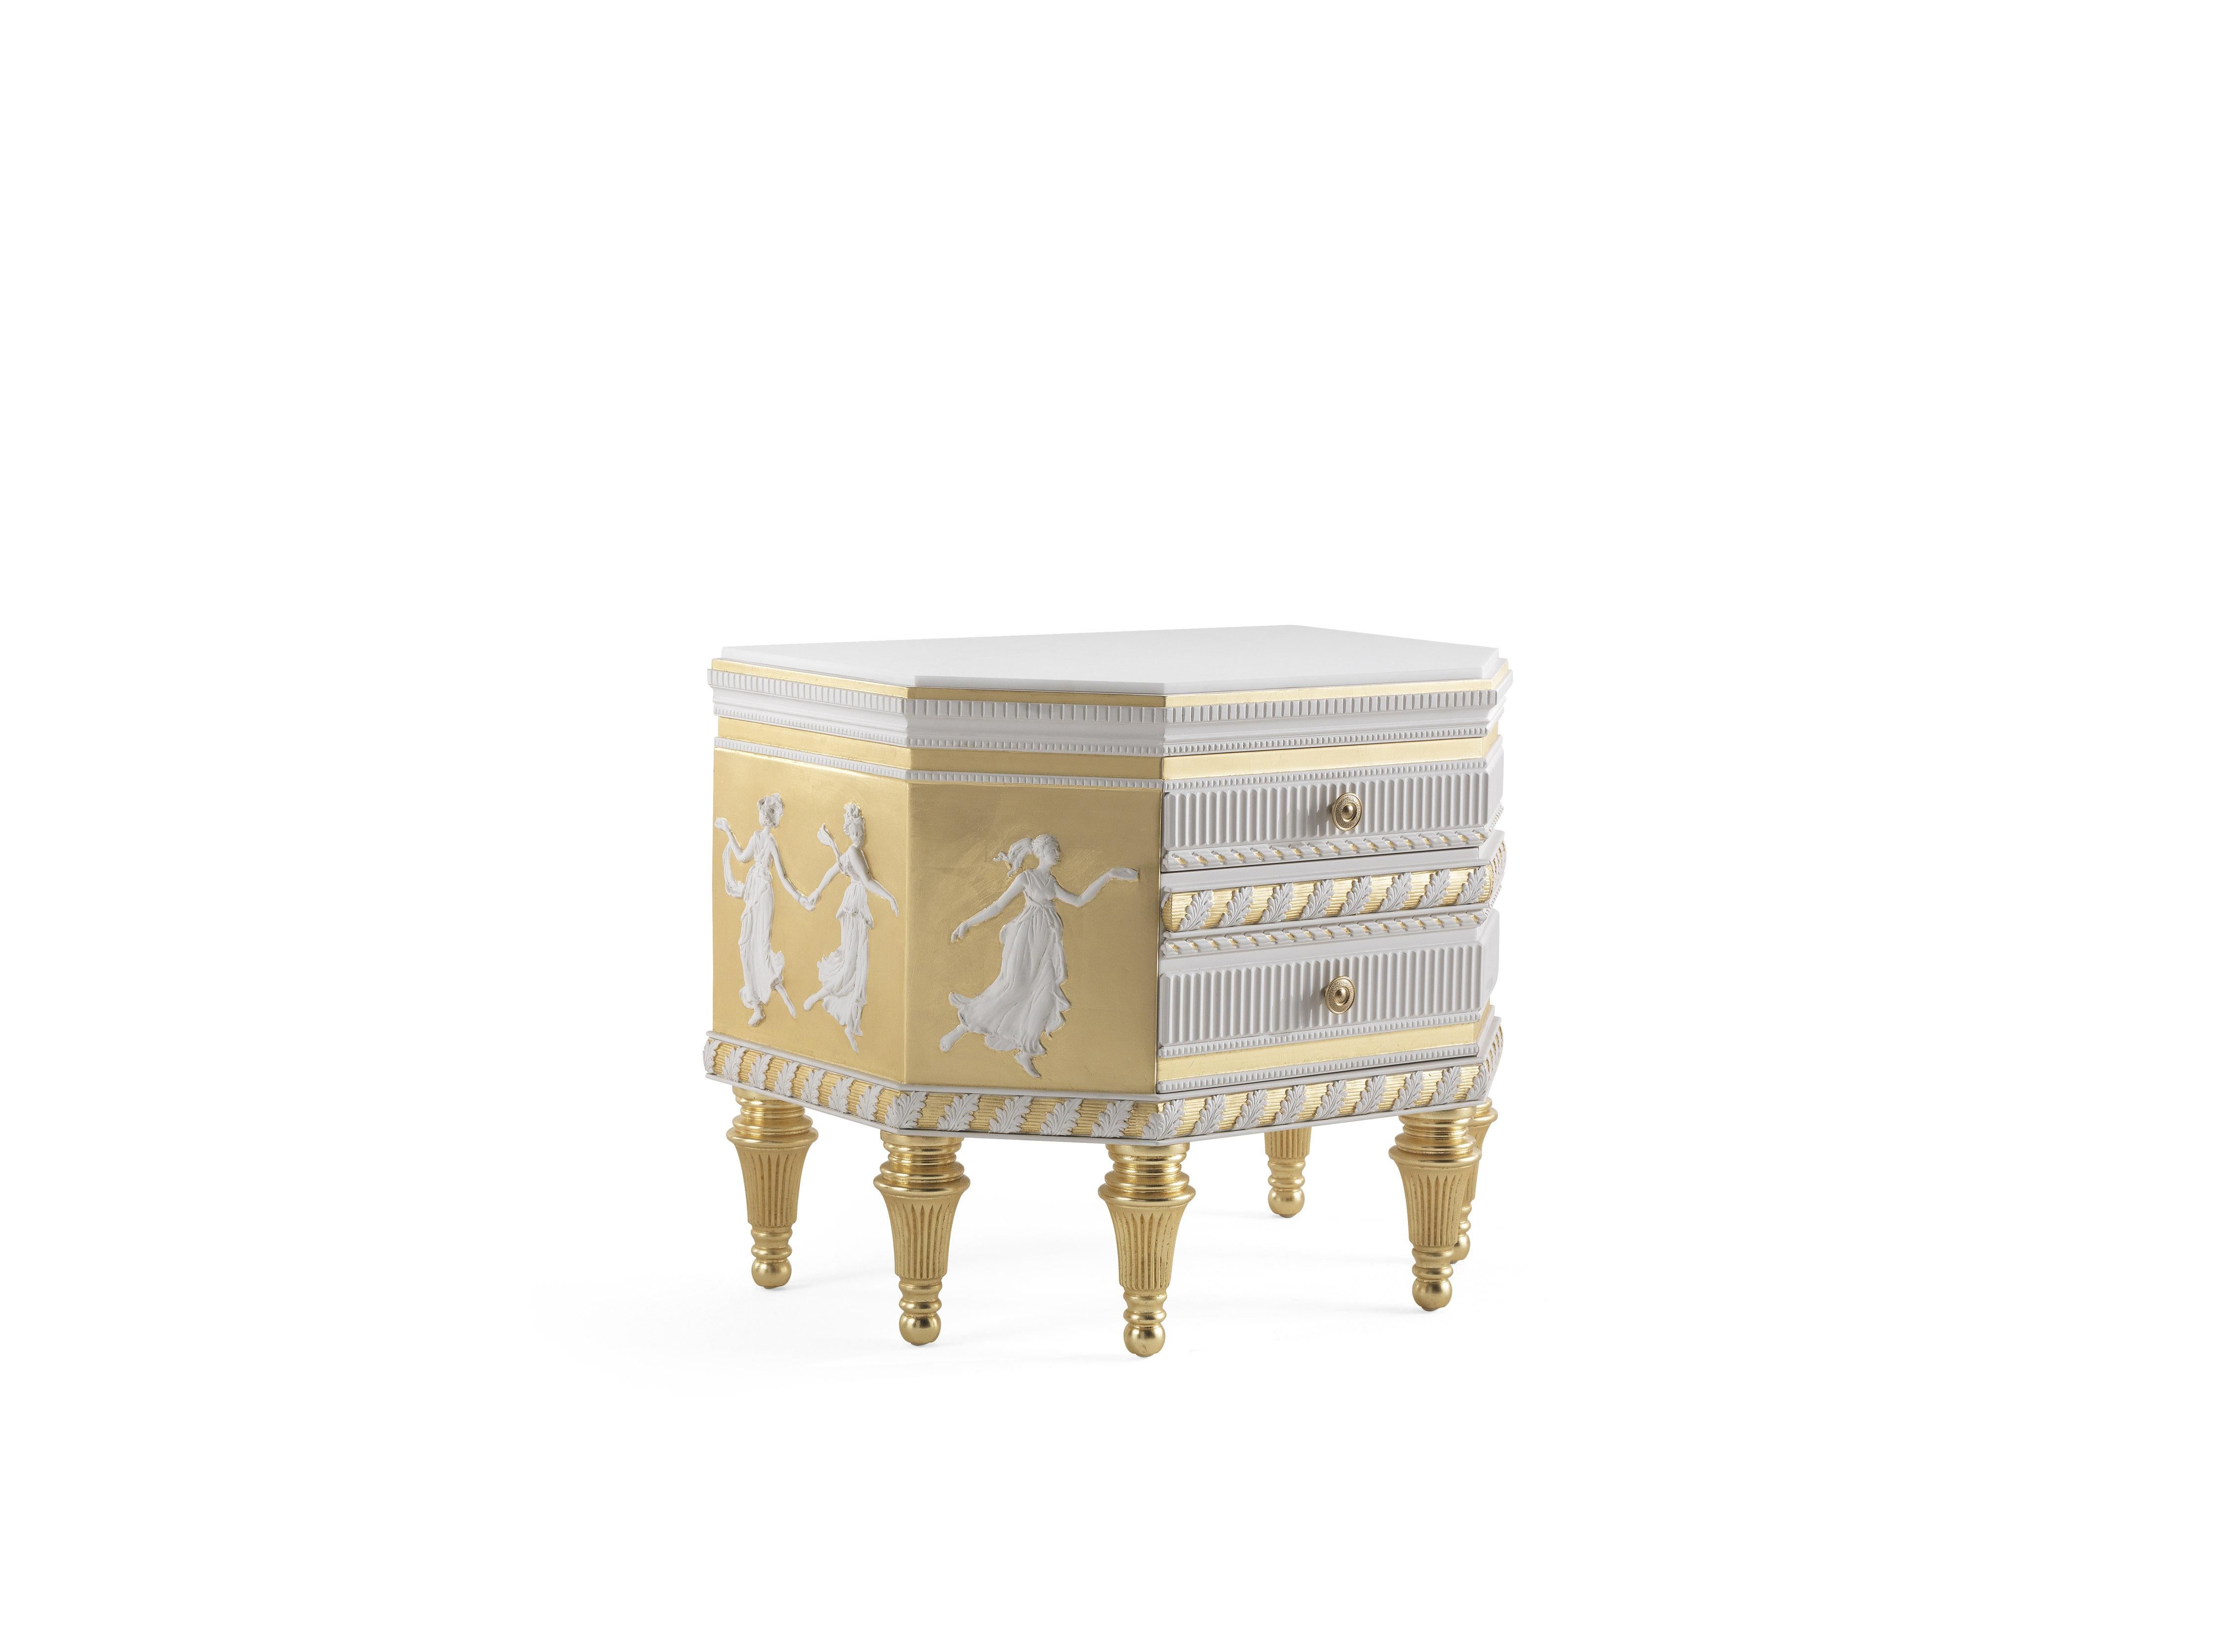 Portland is a delicate and refined line of furnishings, characterized by decorations that recall the world of Wedgwood ceramics. The ornaments with a classic charm are further enhanced by the lacquer finish with a biscuit porcelain effect which